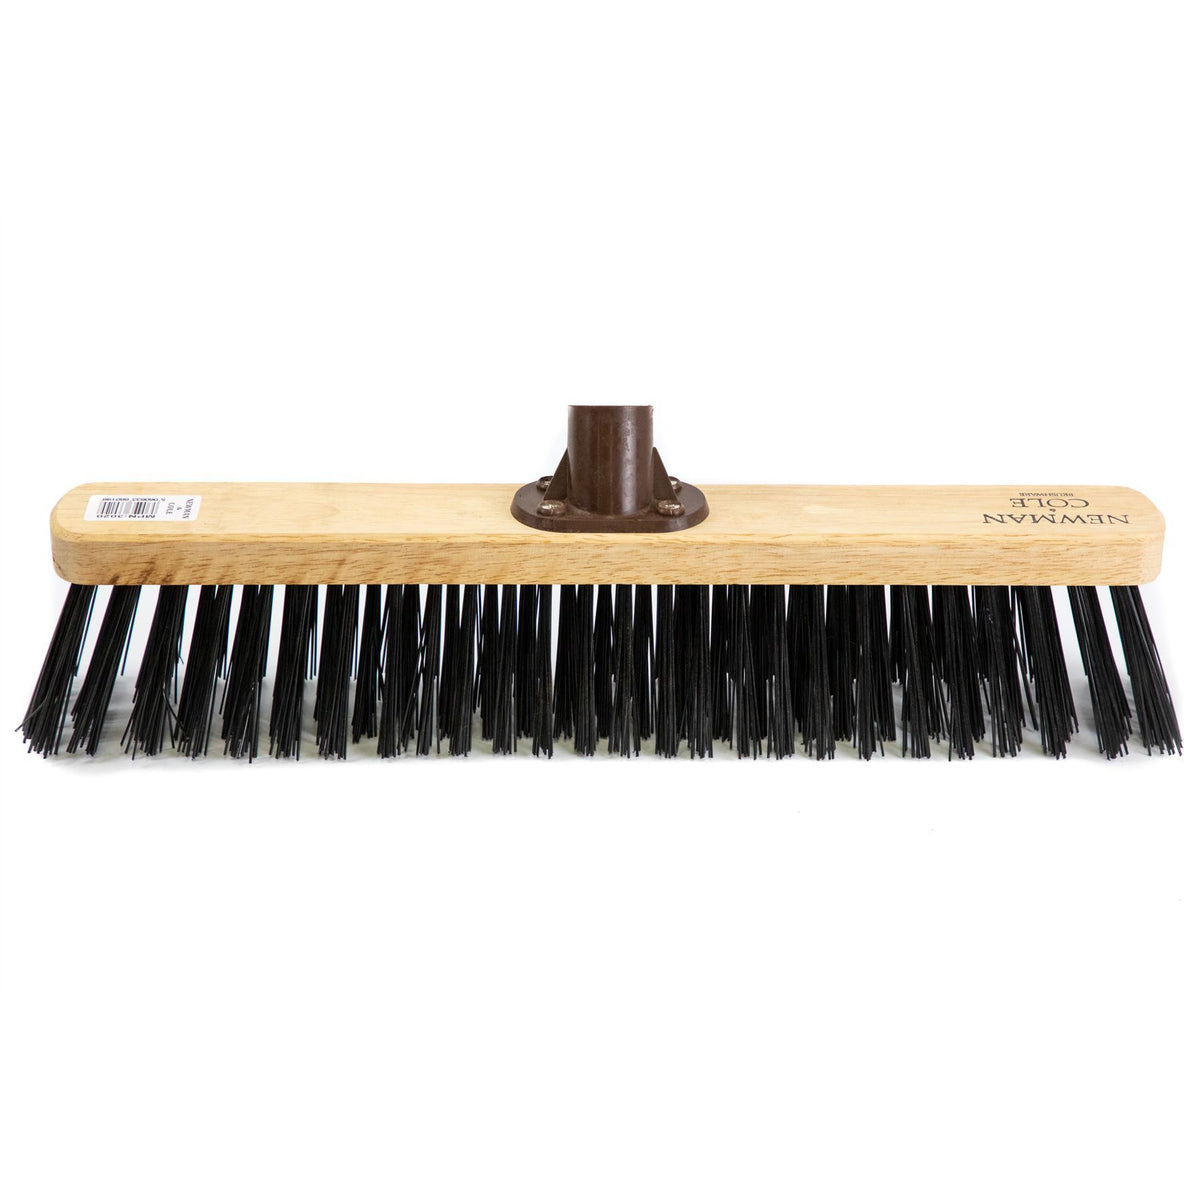 Newman and Cole 18" Stiff Synthetic Broom Head with Plastic Socket - The Dustpan and Brush Store